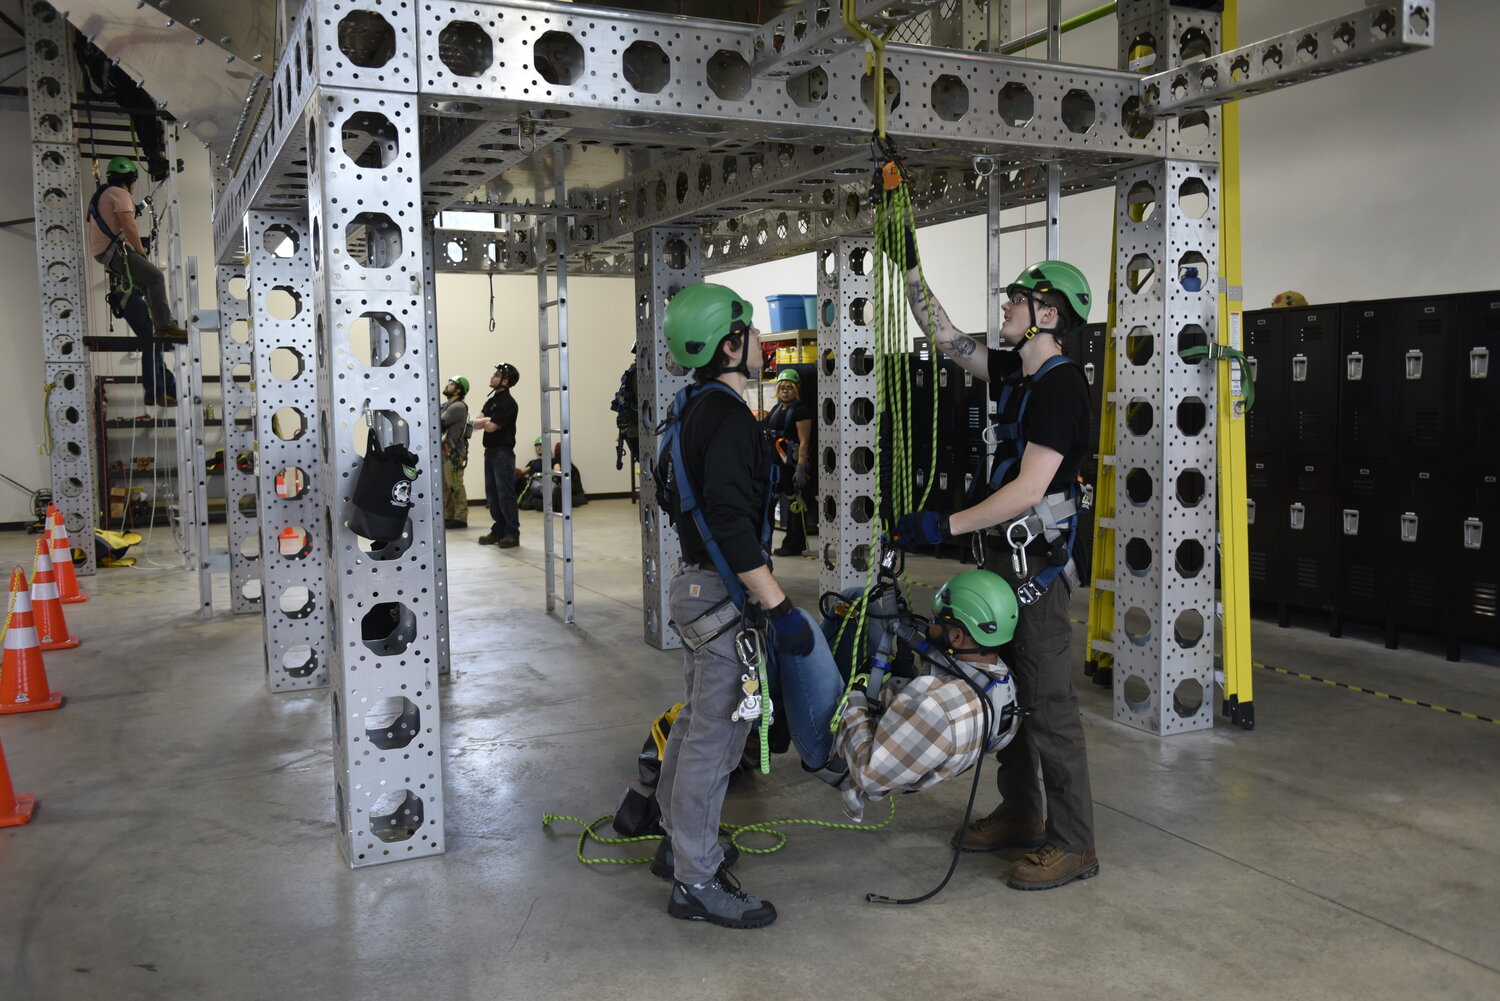 Students from Northwest Renewable Energy Institute are required to practice proper use of harness equipment for wind turbine climbing and repairs.